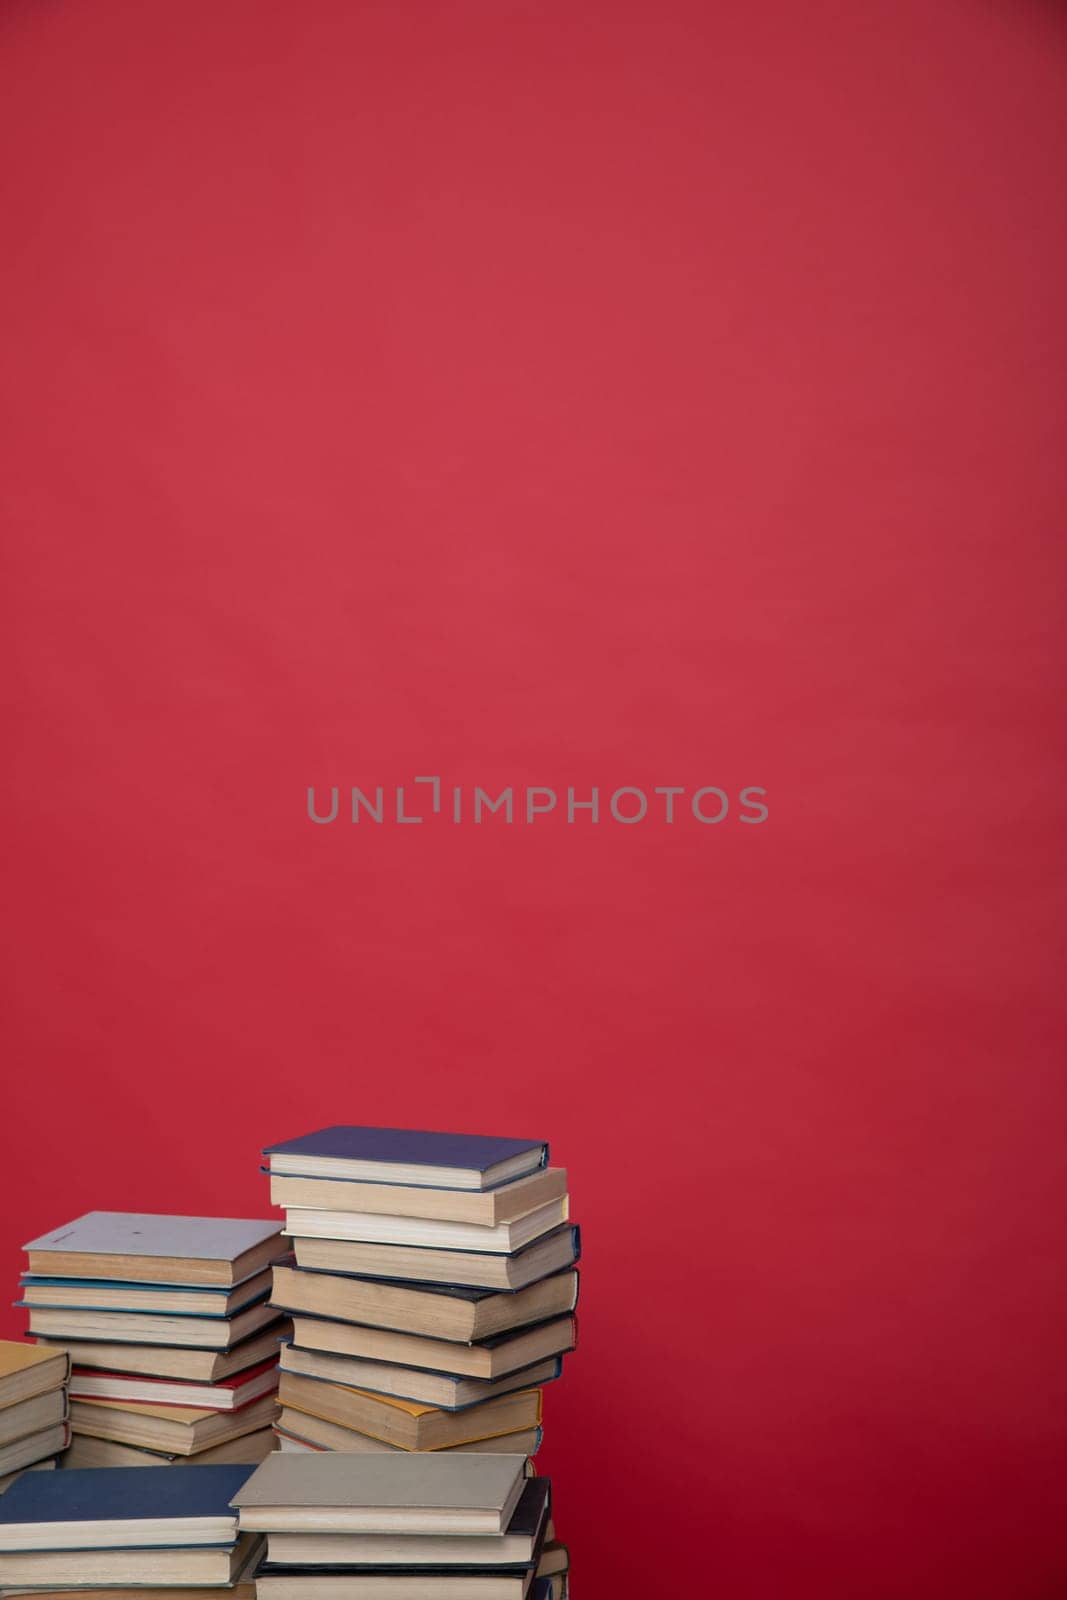 education science learning library stack of books on a red background by Simakov